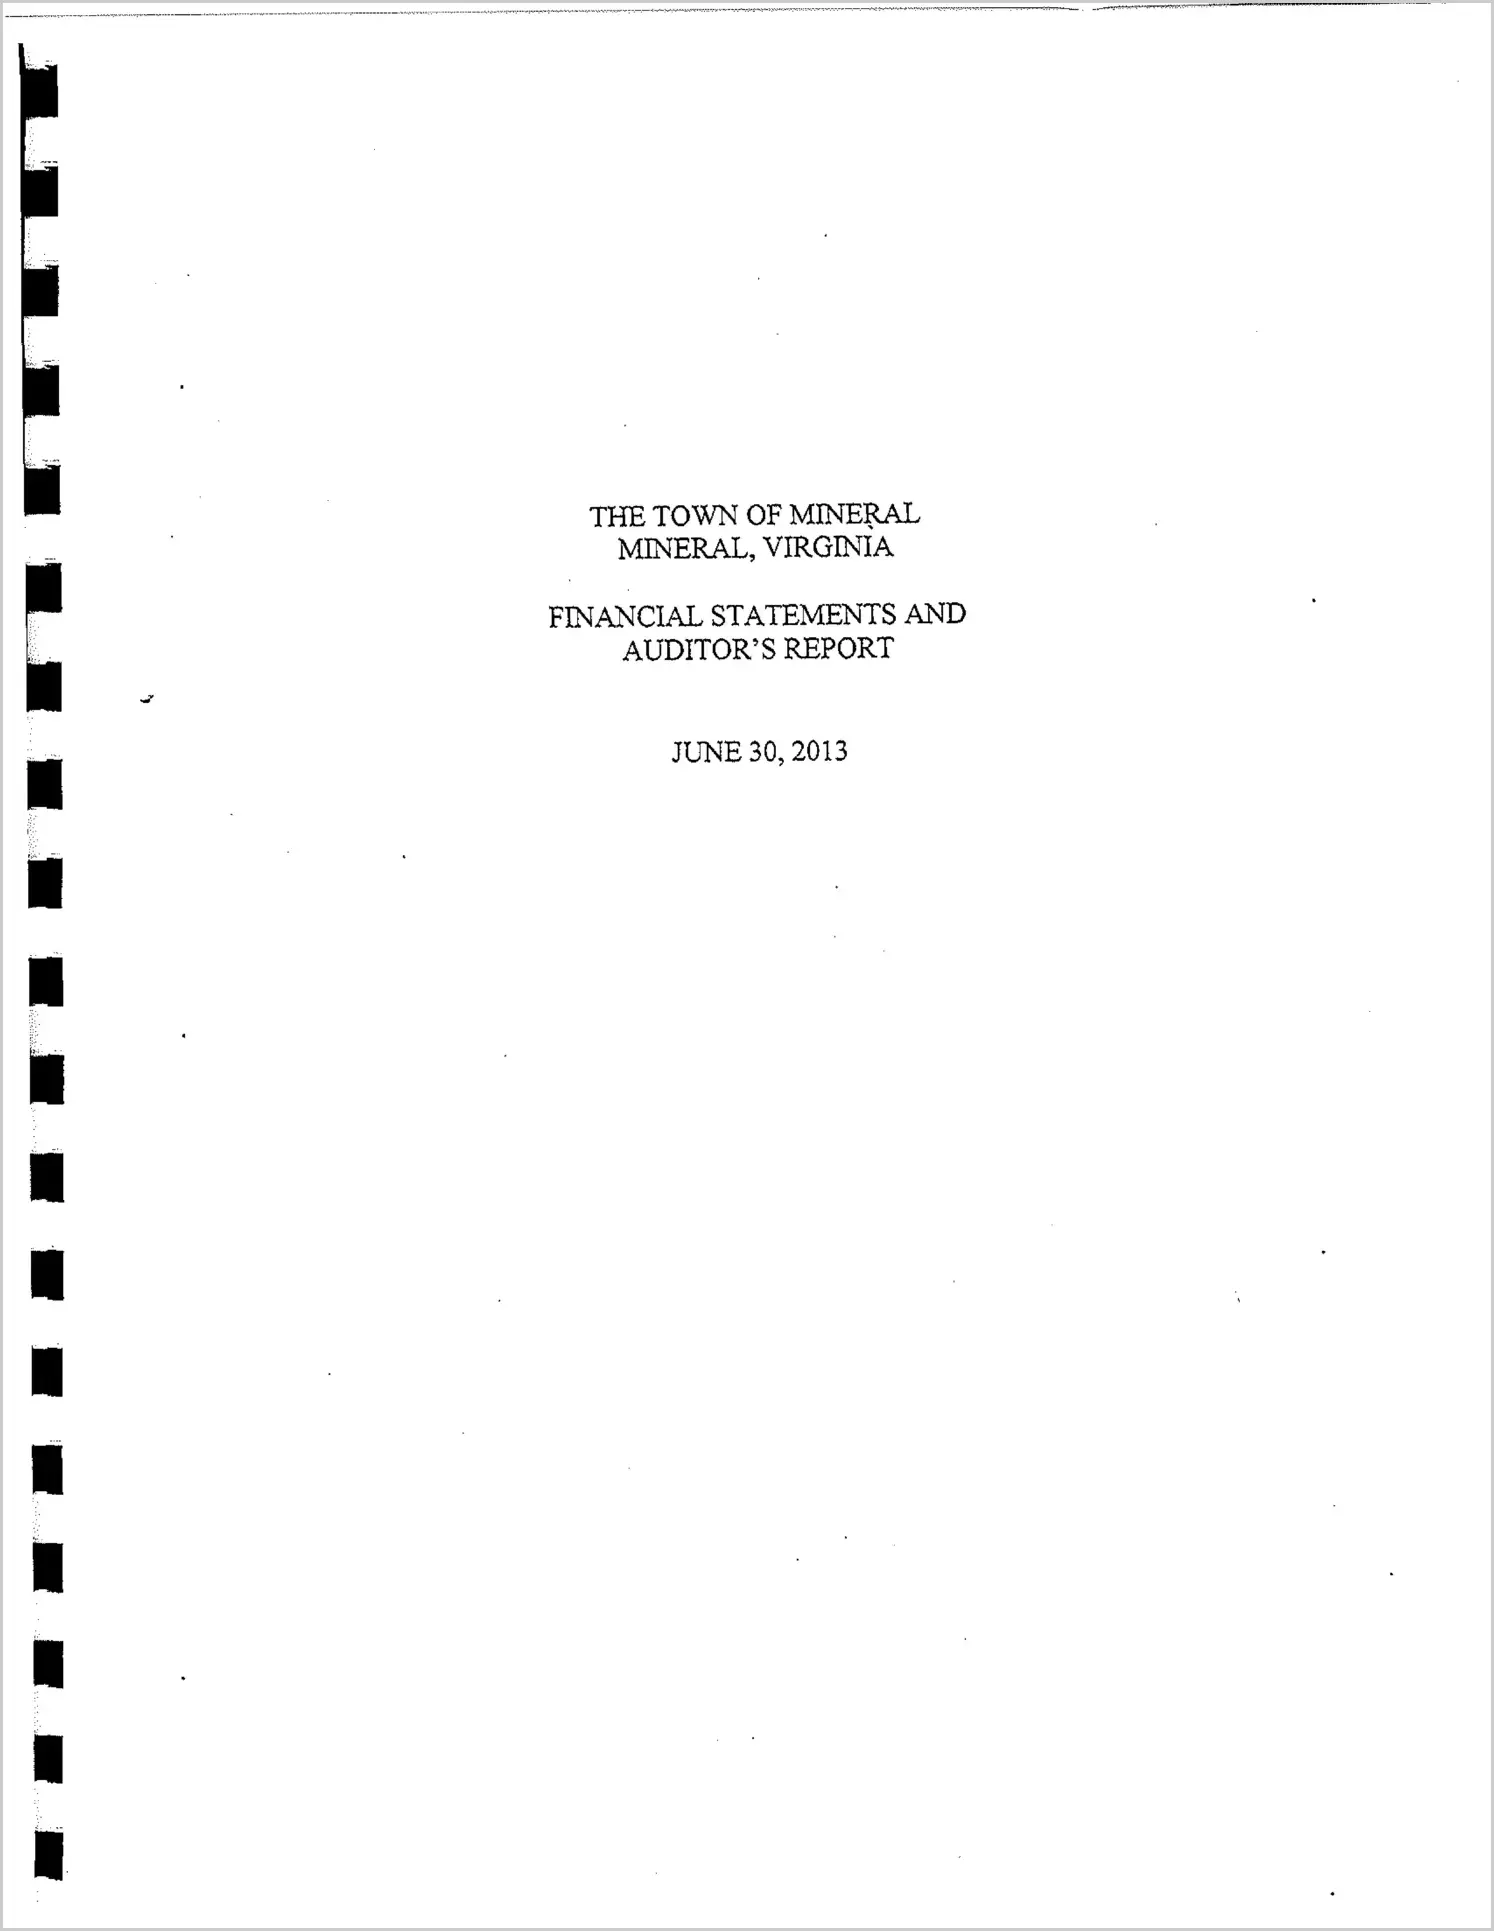 2013 Annual Financial Report for Town of Mineral